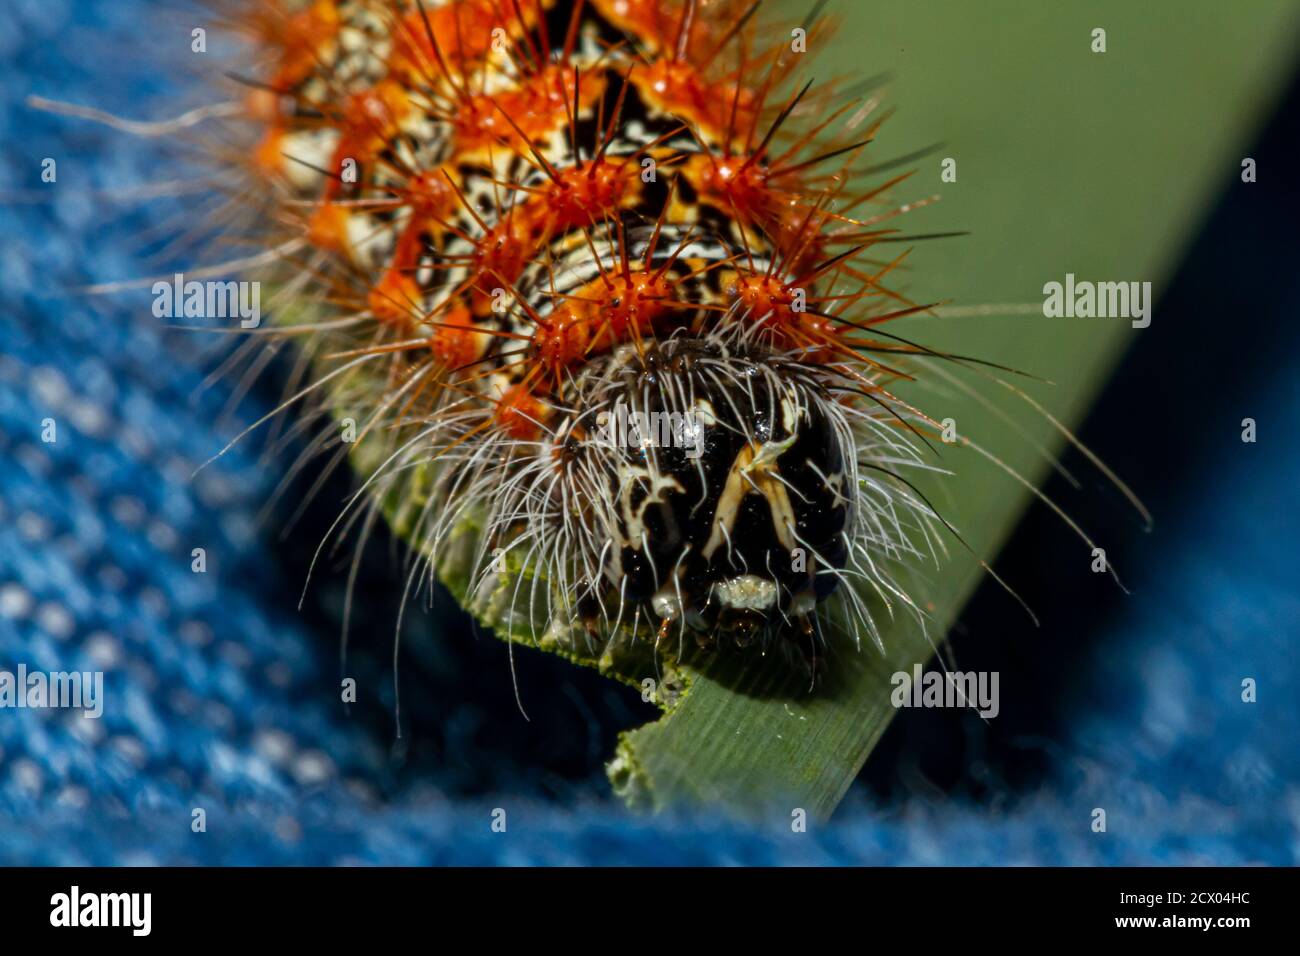 Closeup macro lens head shot image of Lymantria dispar dispar (Gypsy moth caterpillar) that has white cylindrical body with red warts and torn like sp Stock Photo